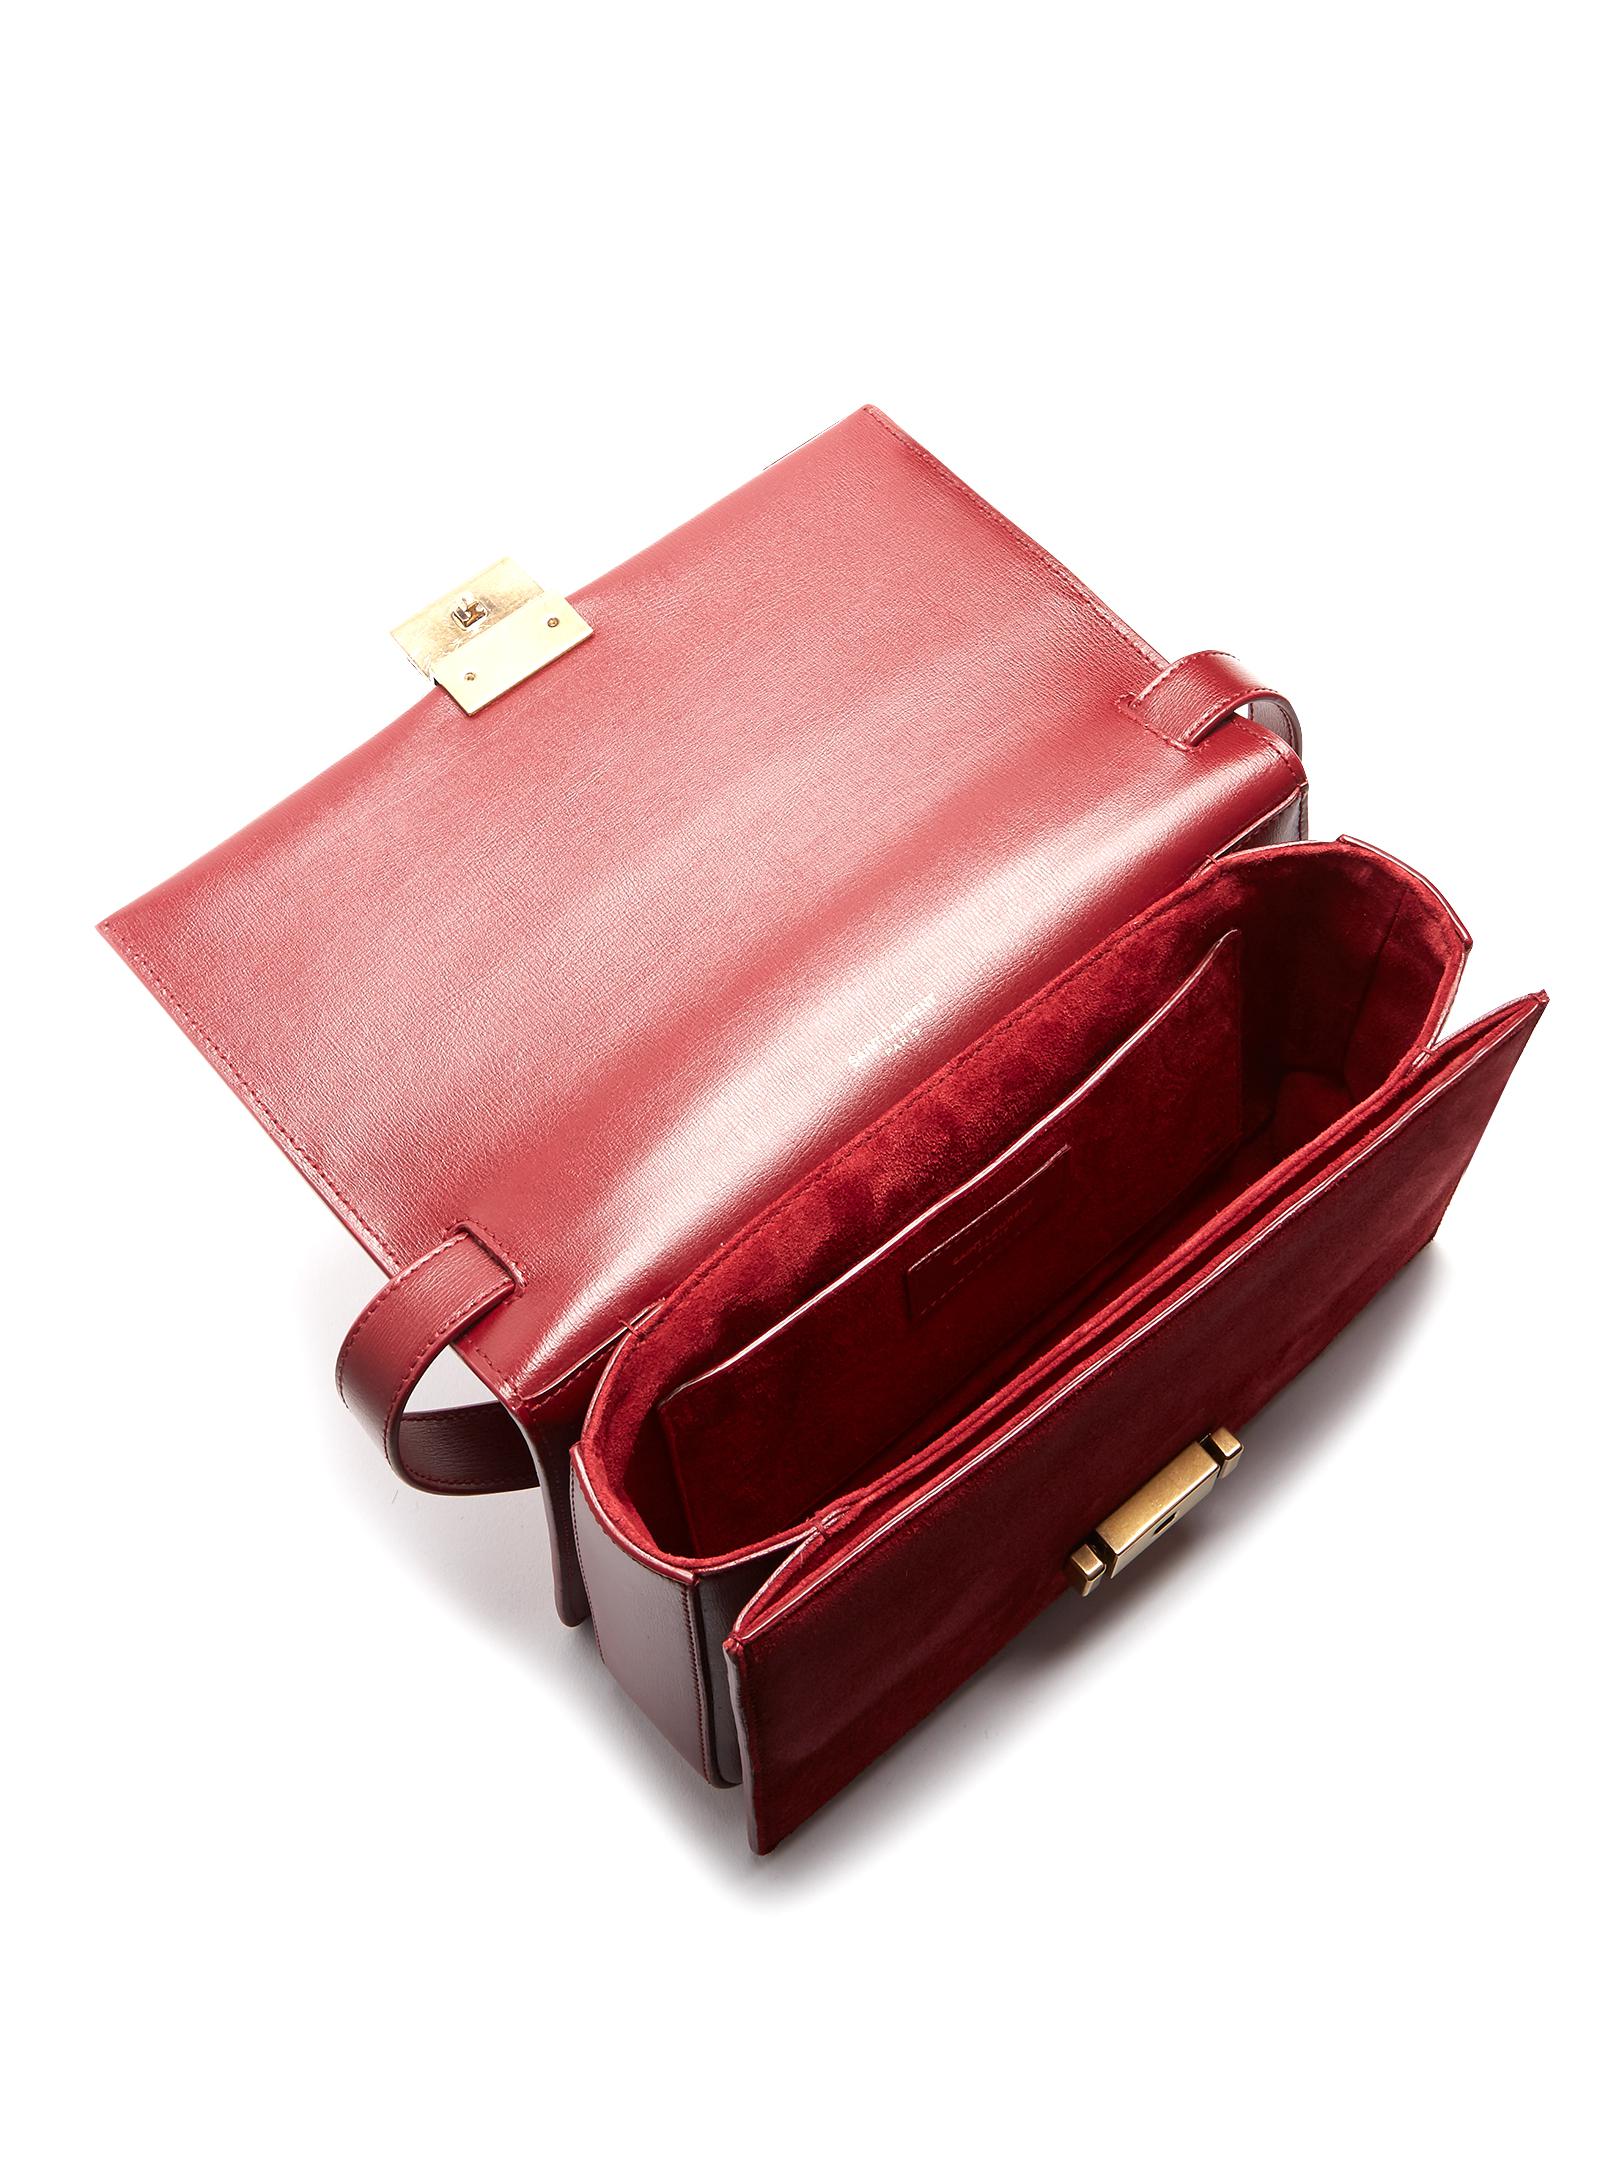 Saint Laurent Bellechasse Medium Leather And Suede Bag in Red